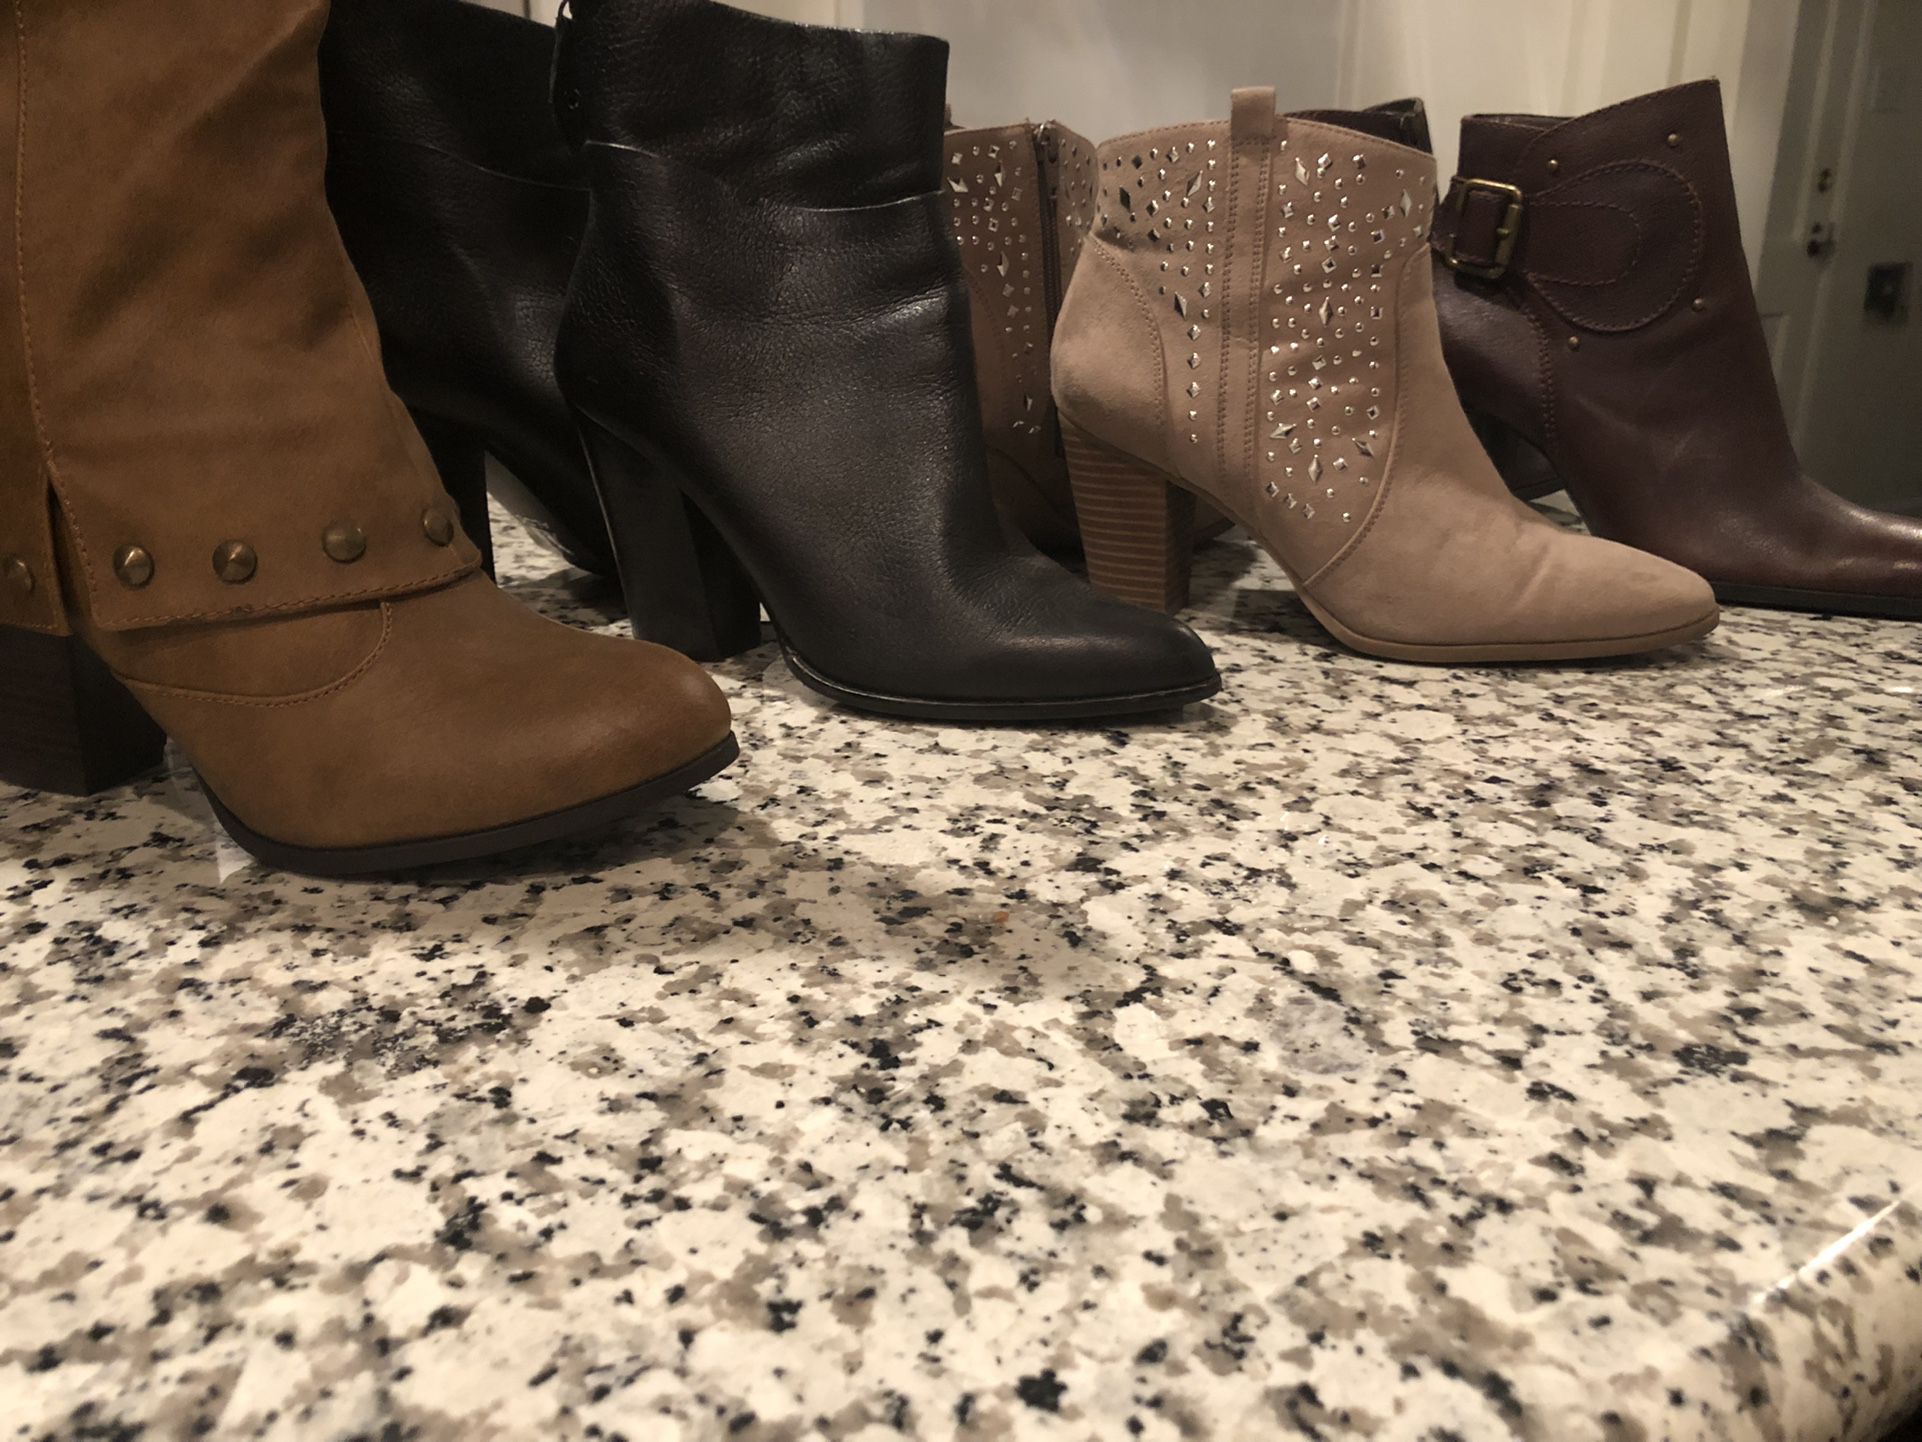 Ankle/high Boots